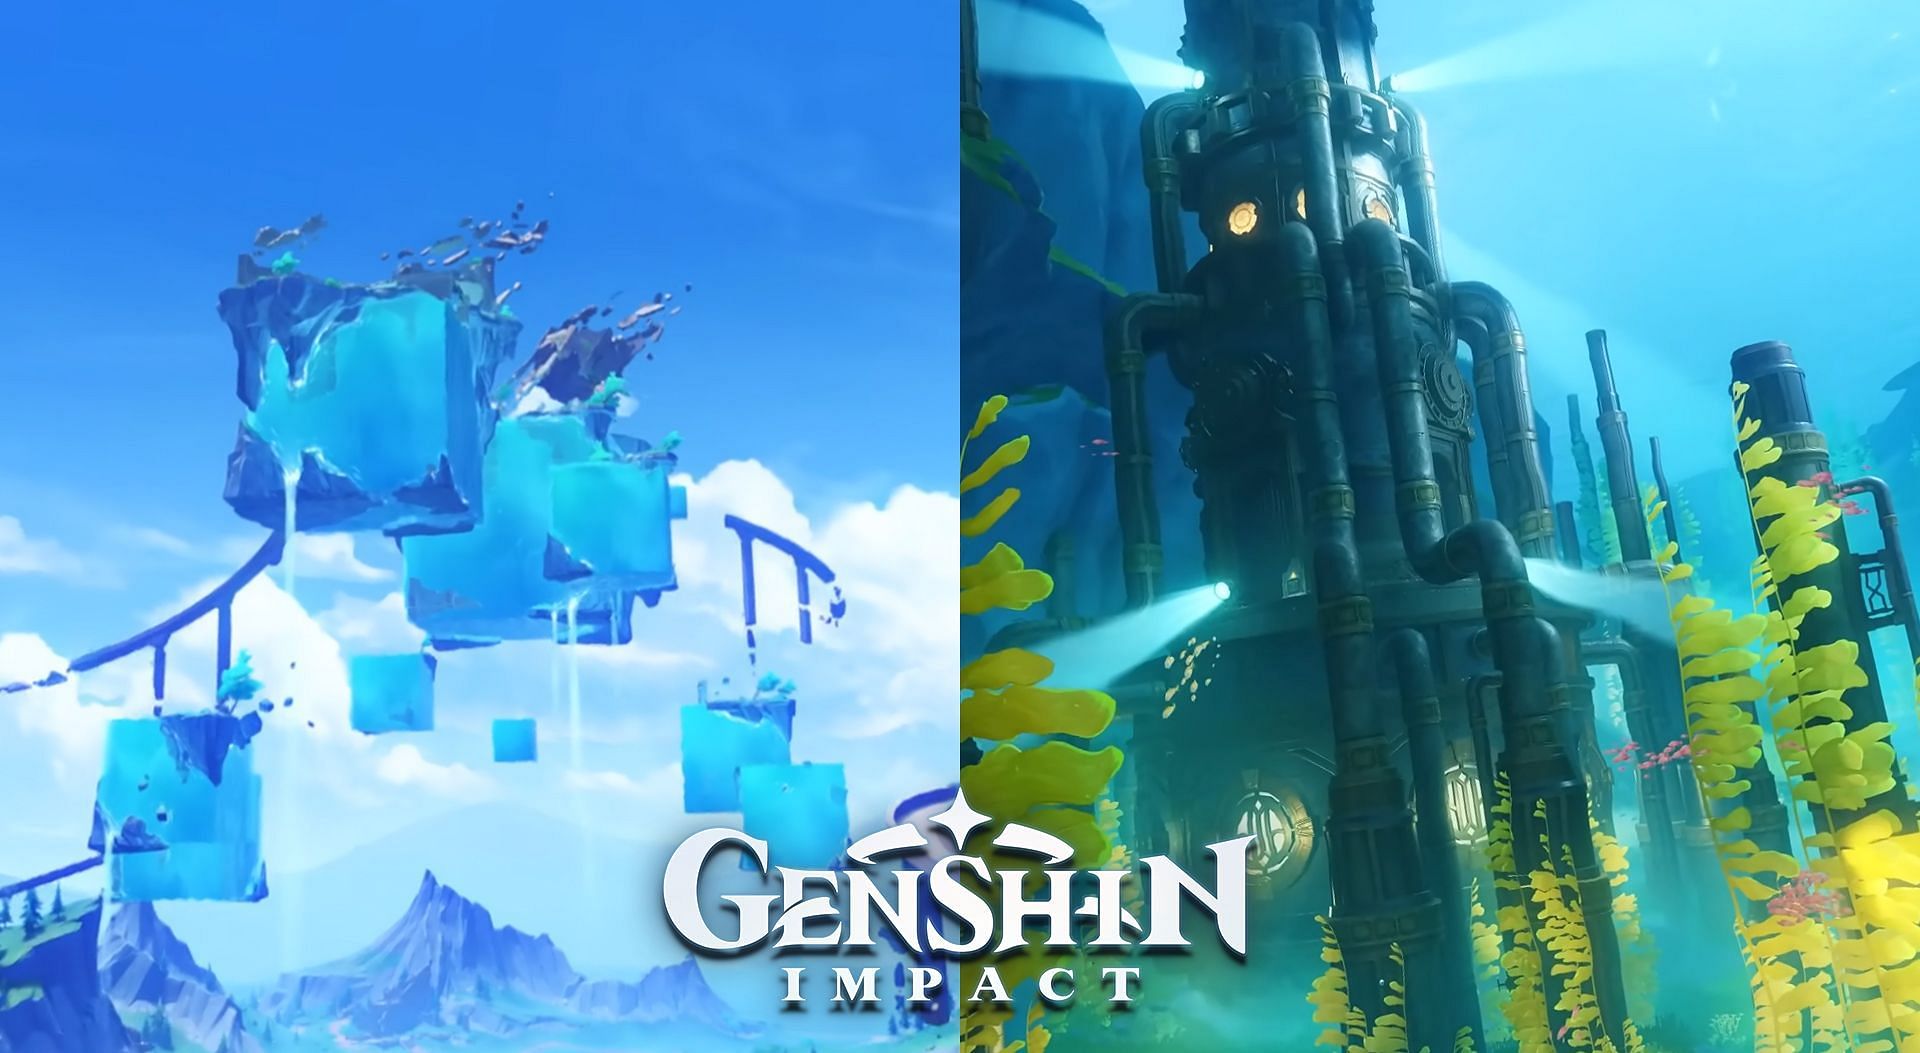 Genshin Impact will release new areas, enemies, and much more in 4.1 update.